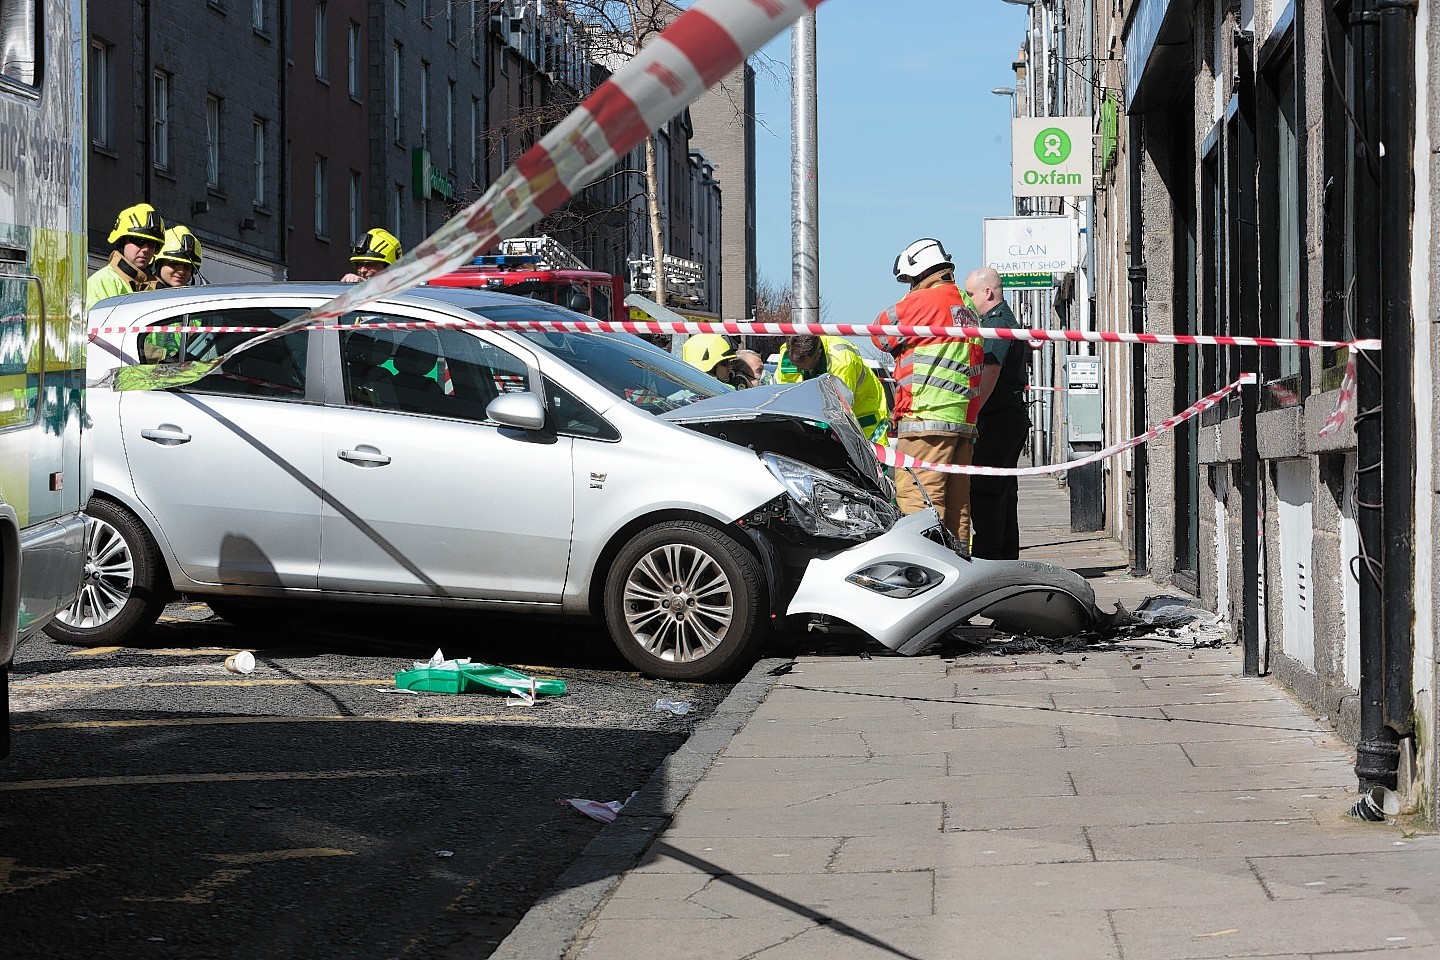 The runaway car crashed into the front of a gift shop